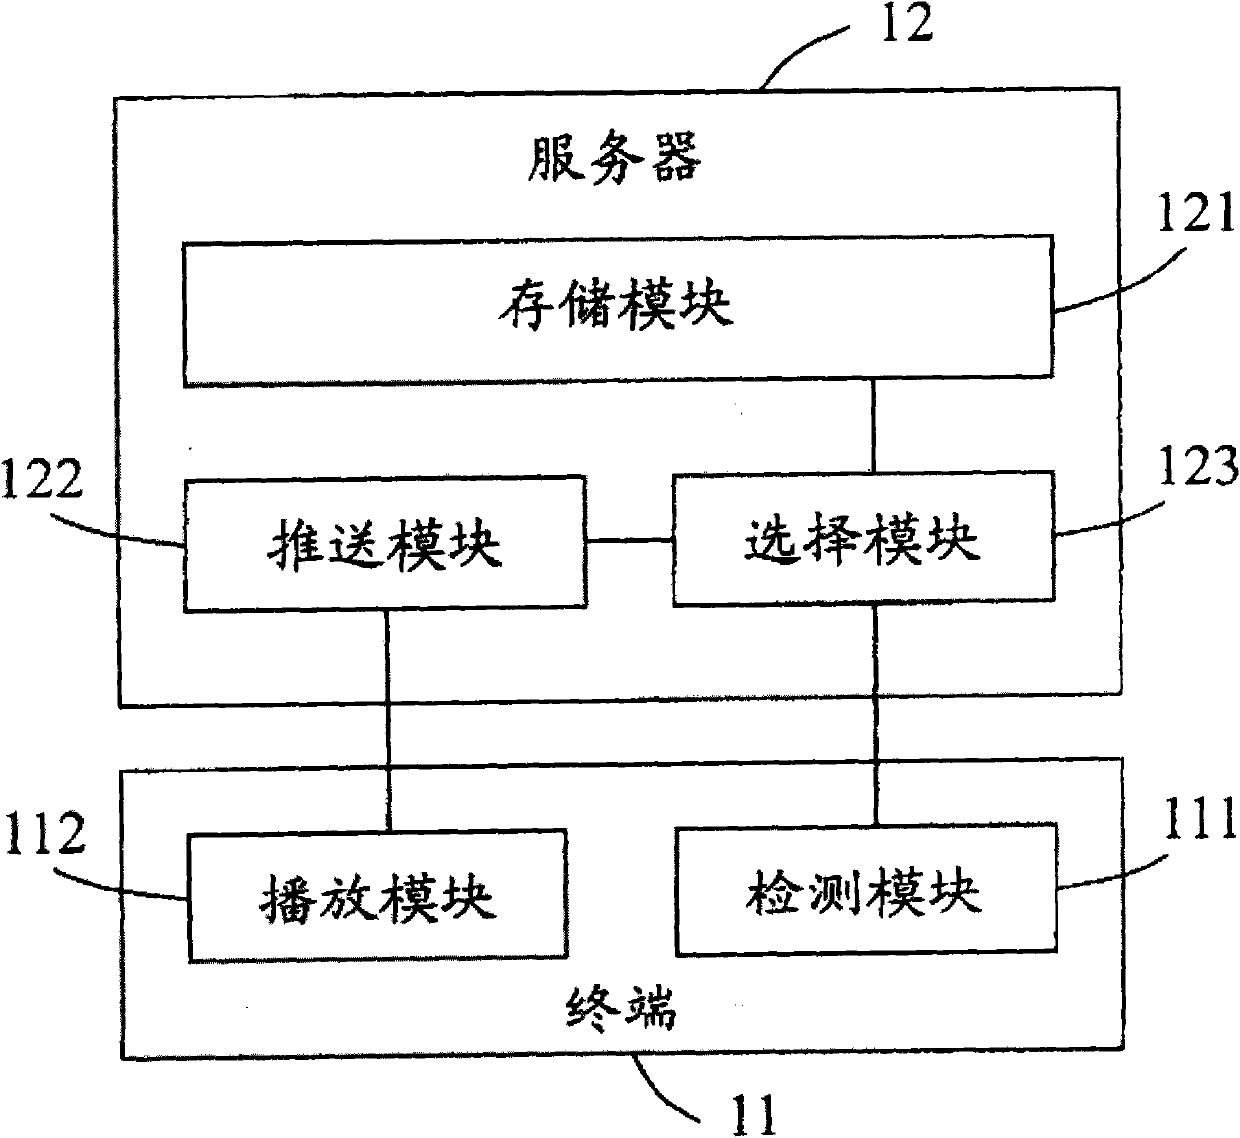 System and method for transmitting electronic newspaper based on China mobile multimedia broadcasting (CMMB)